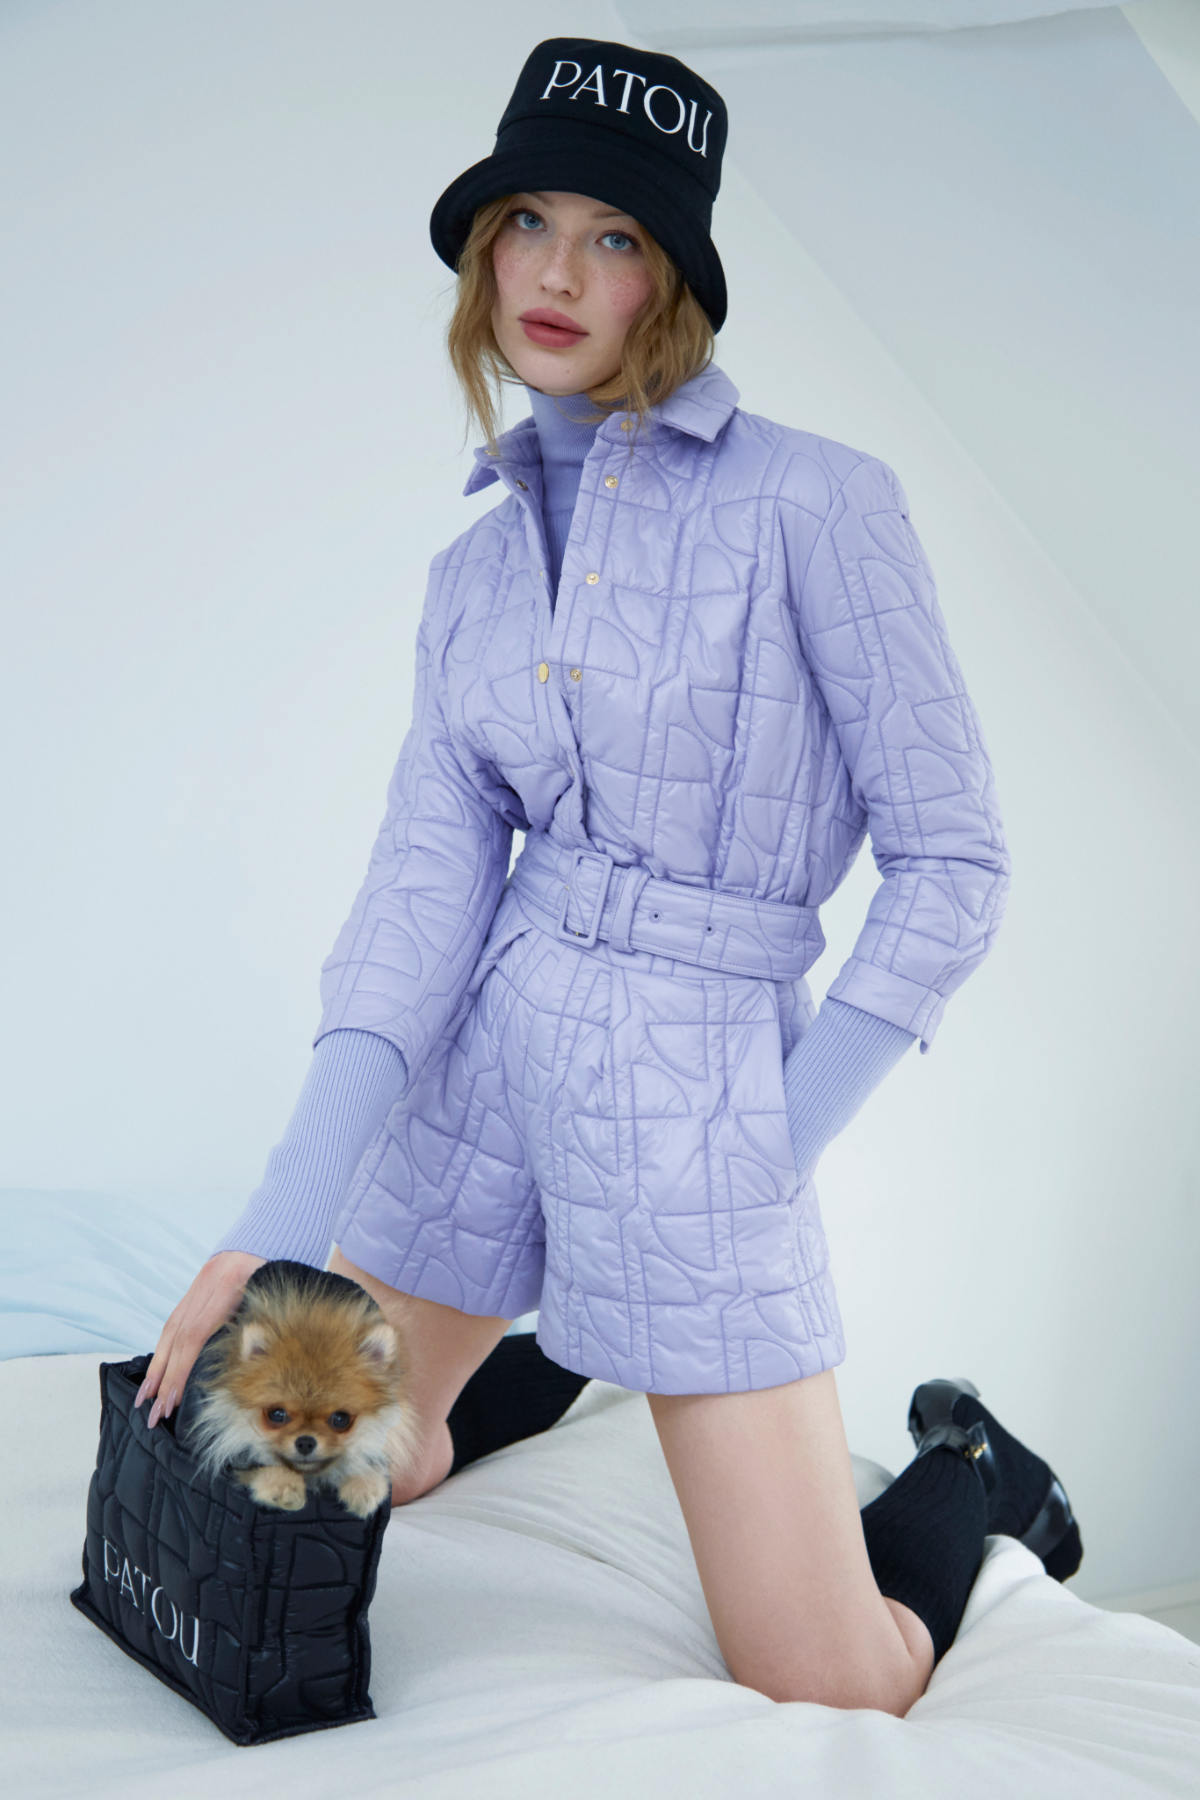 Patou Fall Winter 2022 Collection - Act 3&4: The Patou Two